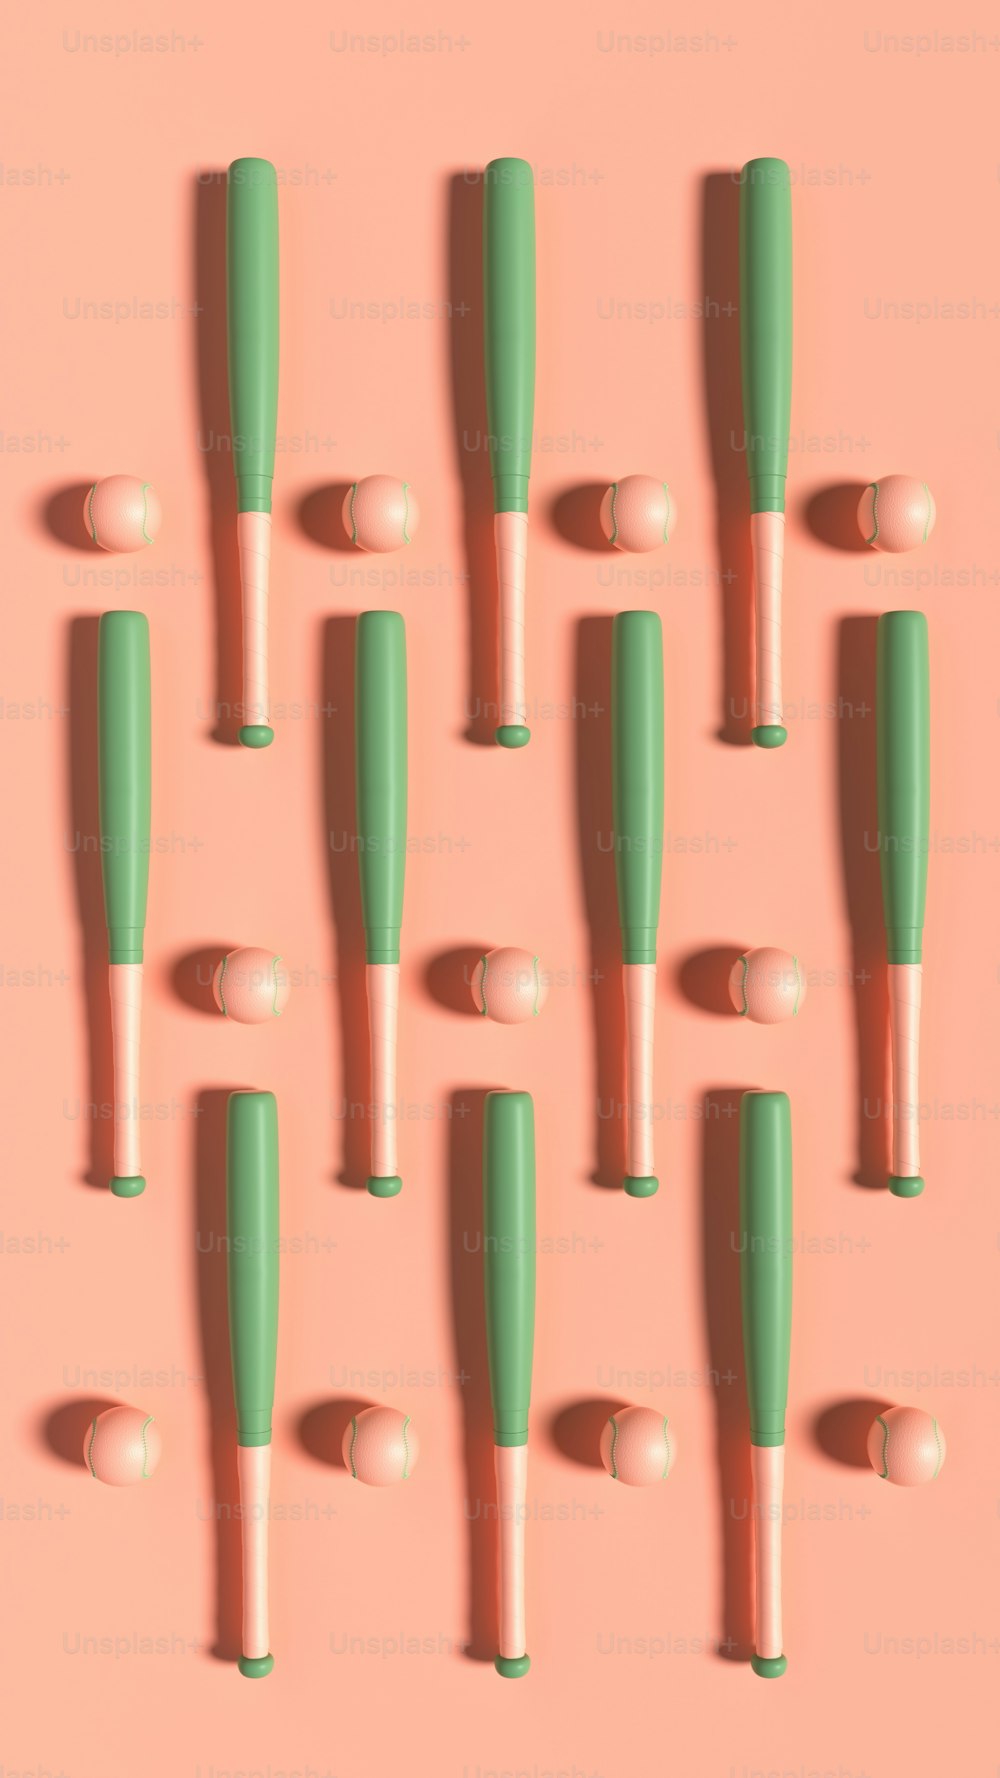 a group of green and white toothbrushes on a pink background